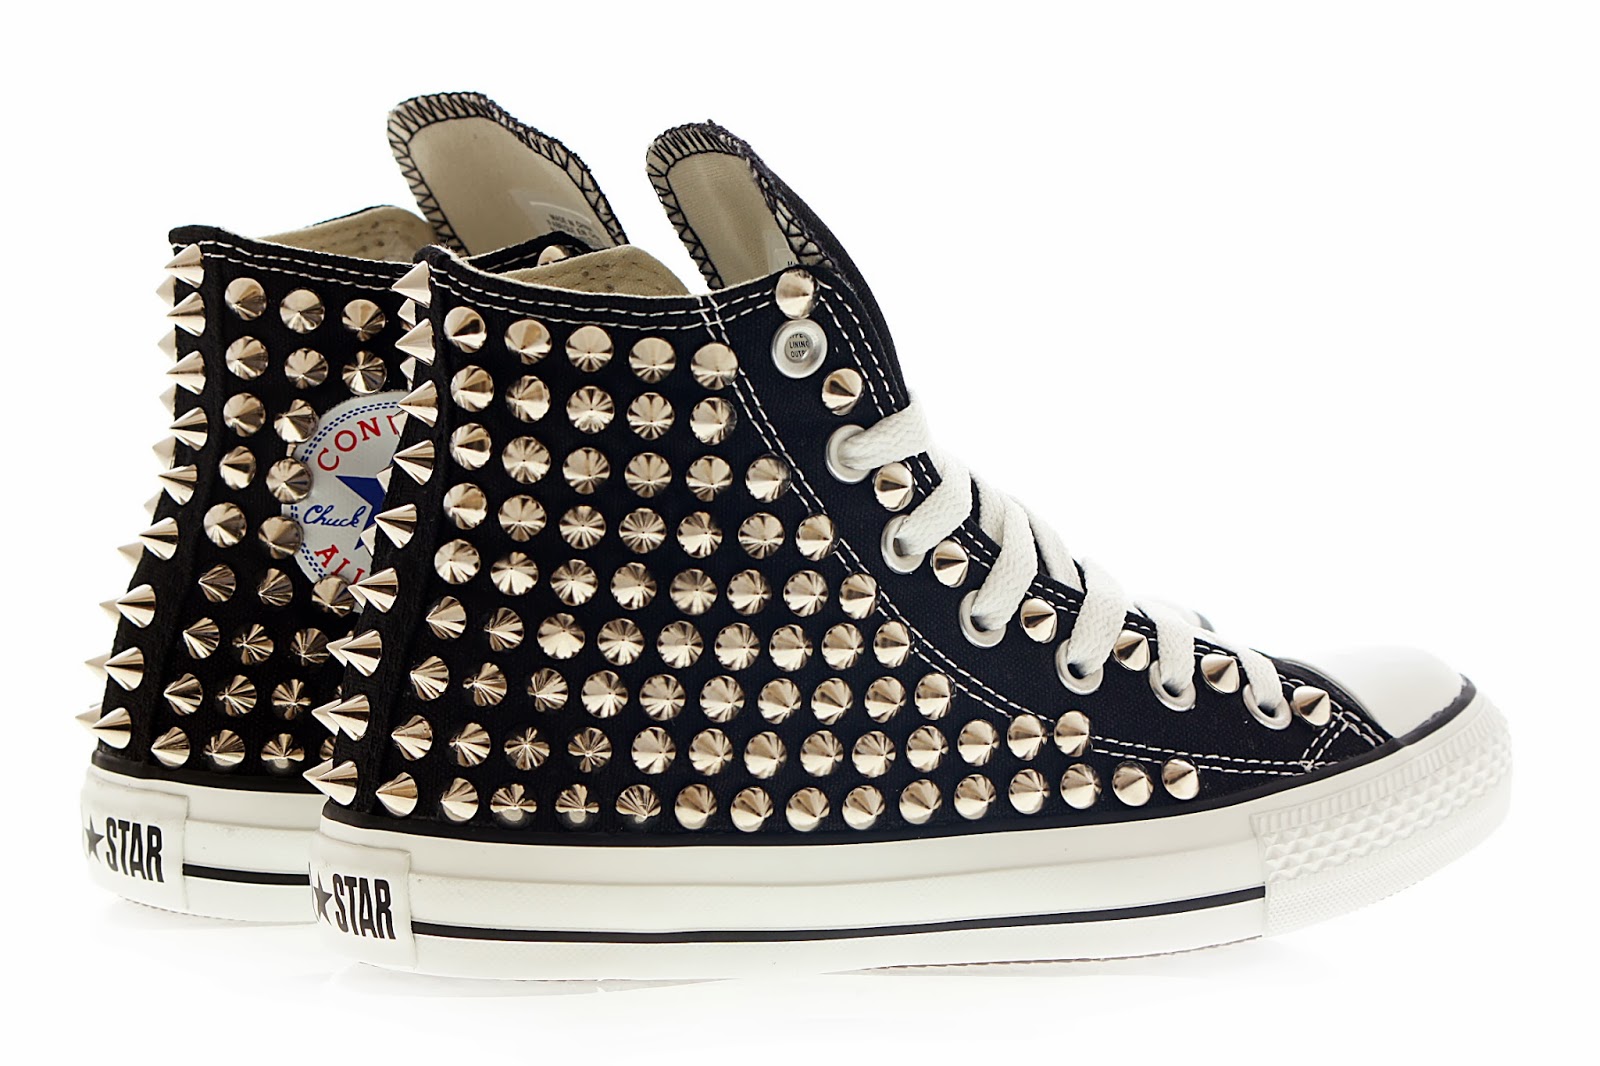 Studs and Spikes: Studded Converse, Silver Cone Studs with Black